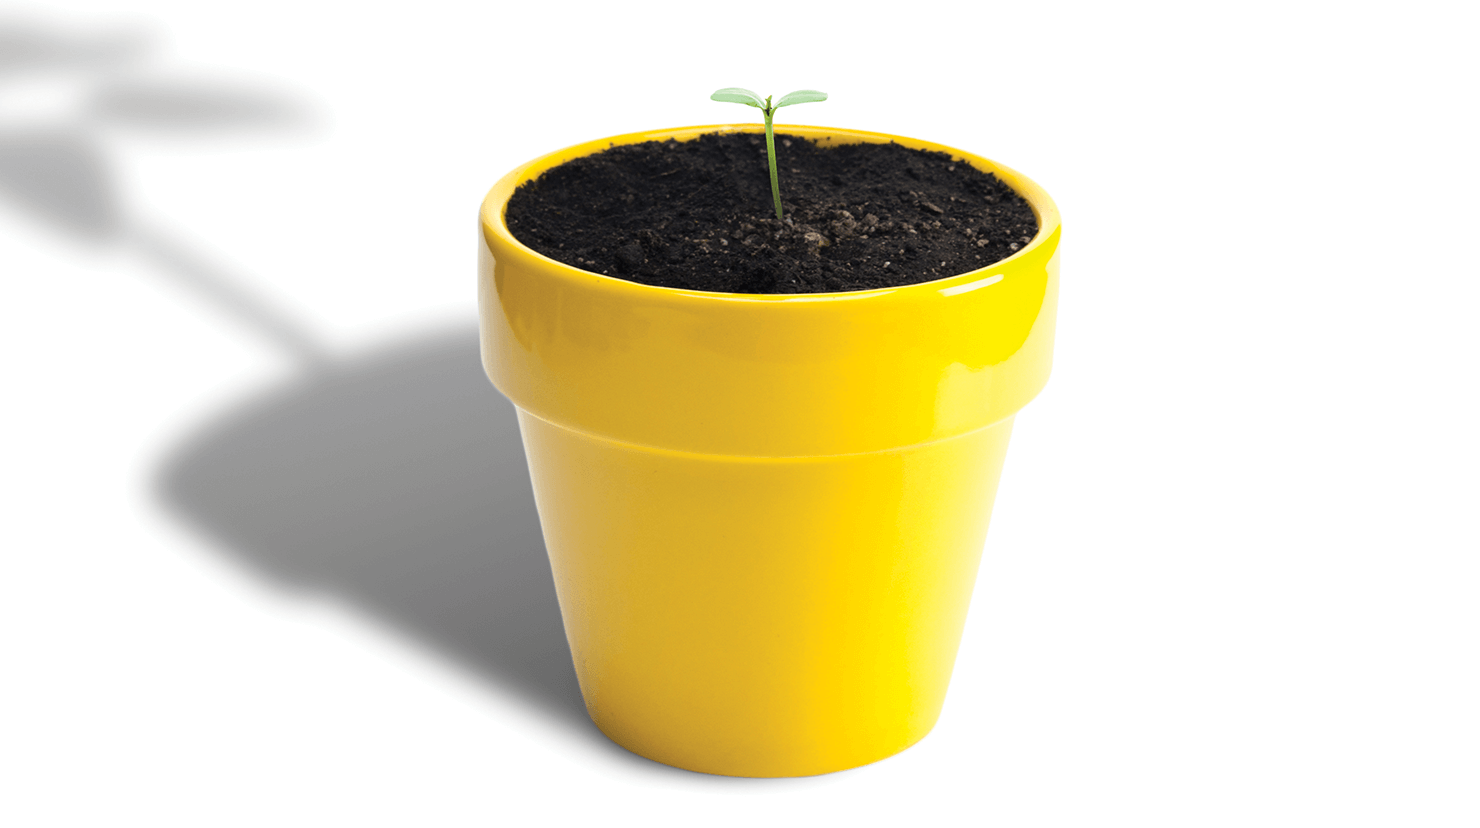  Small tree growing out of yellow pot